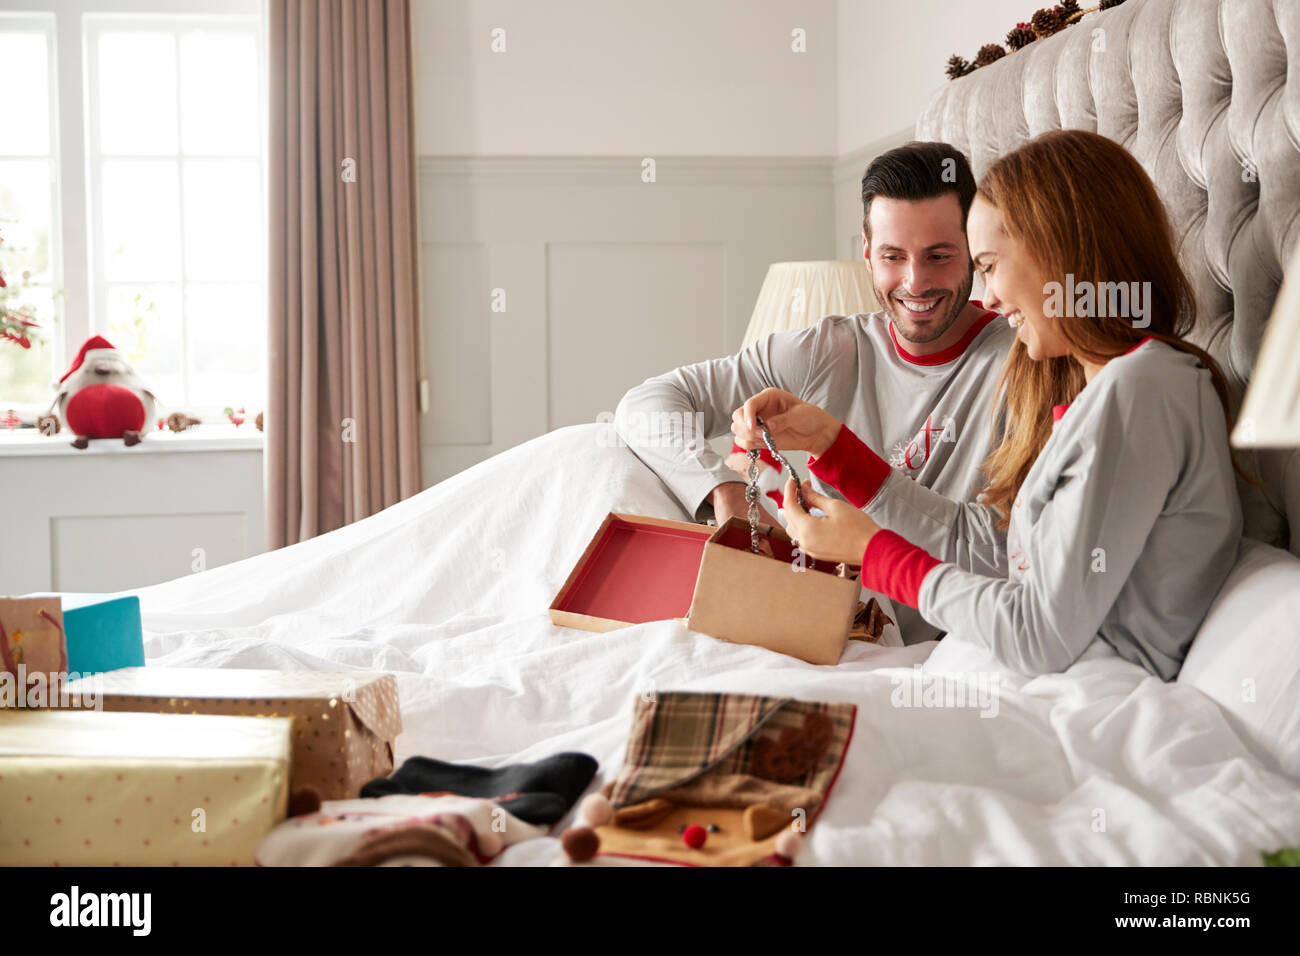 Woman Opening Gift Of Necklace In Bed At Home As Couple Exchange Presents On Christmas Day Stock Photo